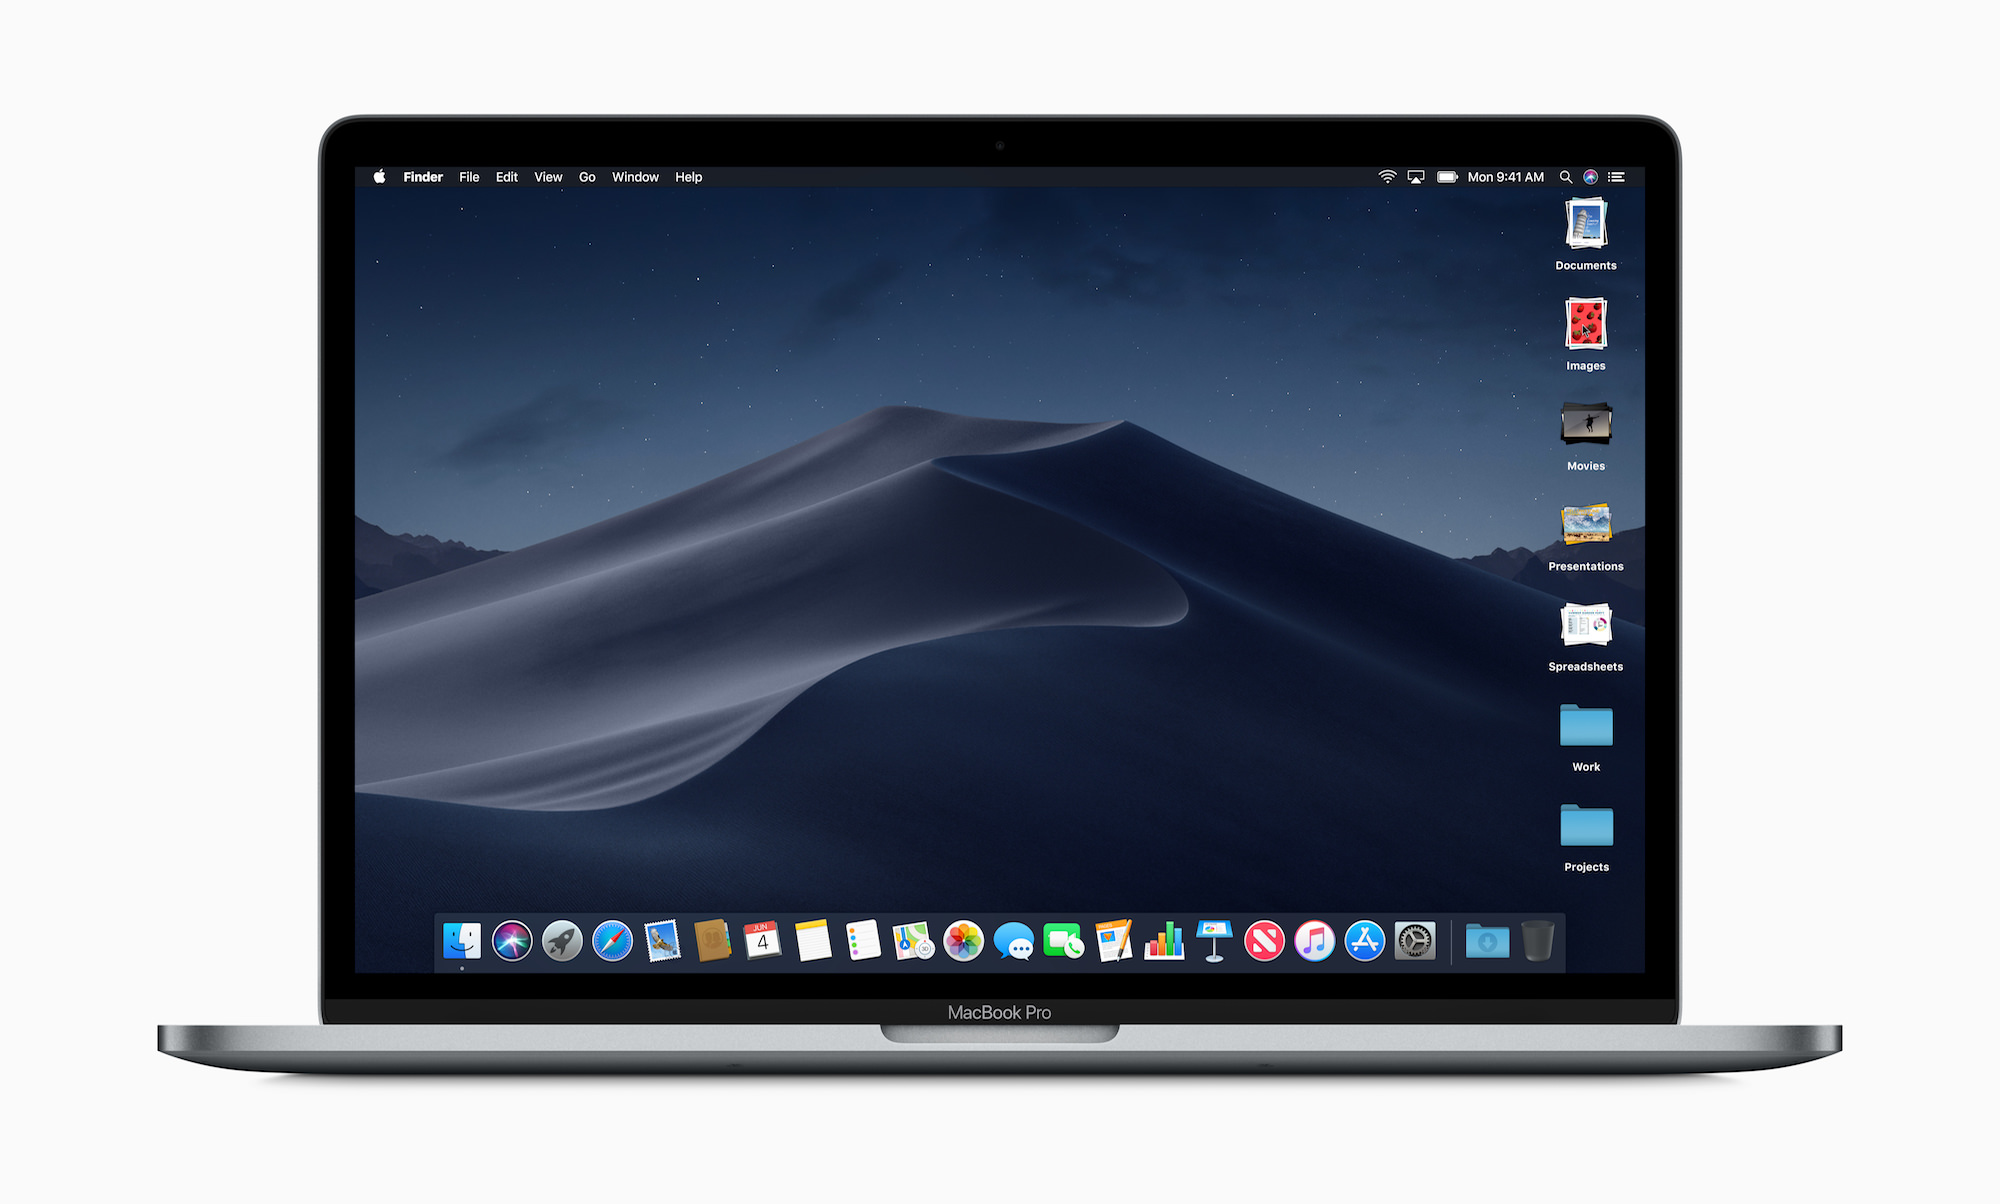 Mojave instal the new